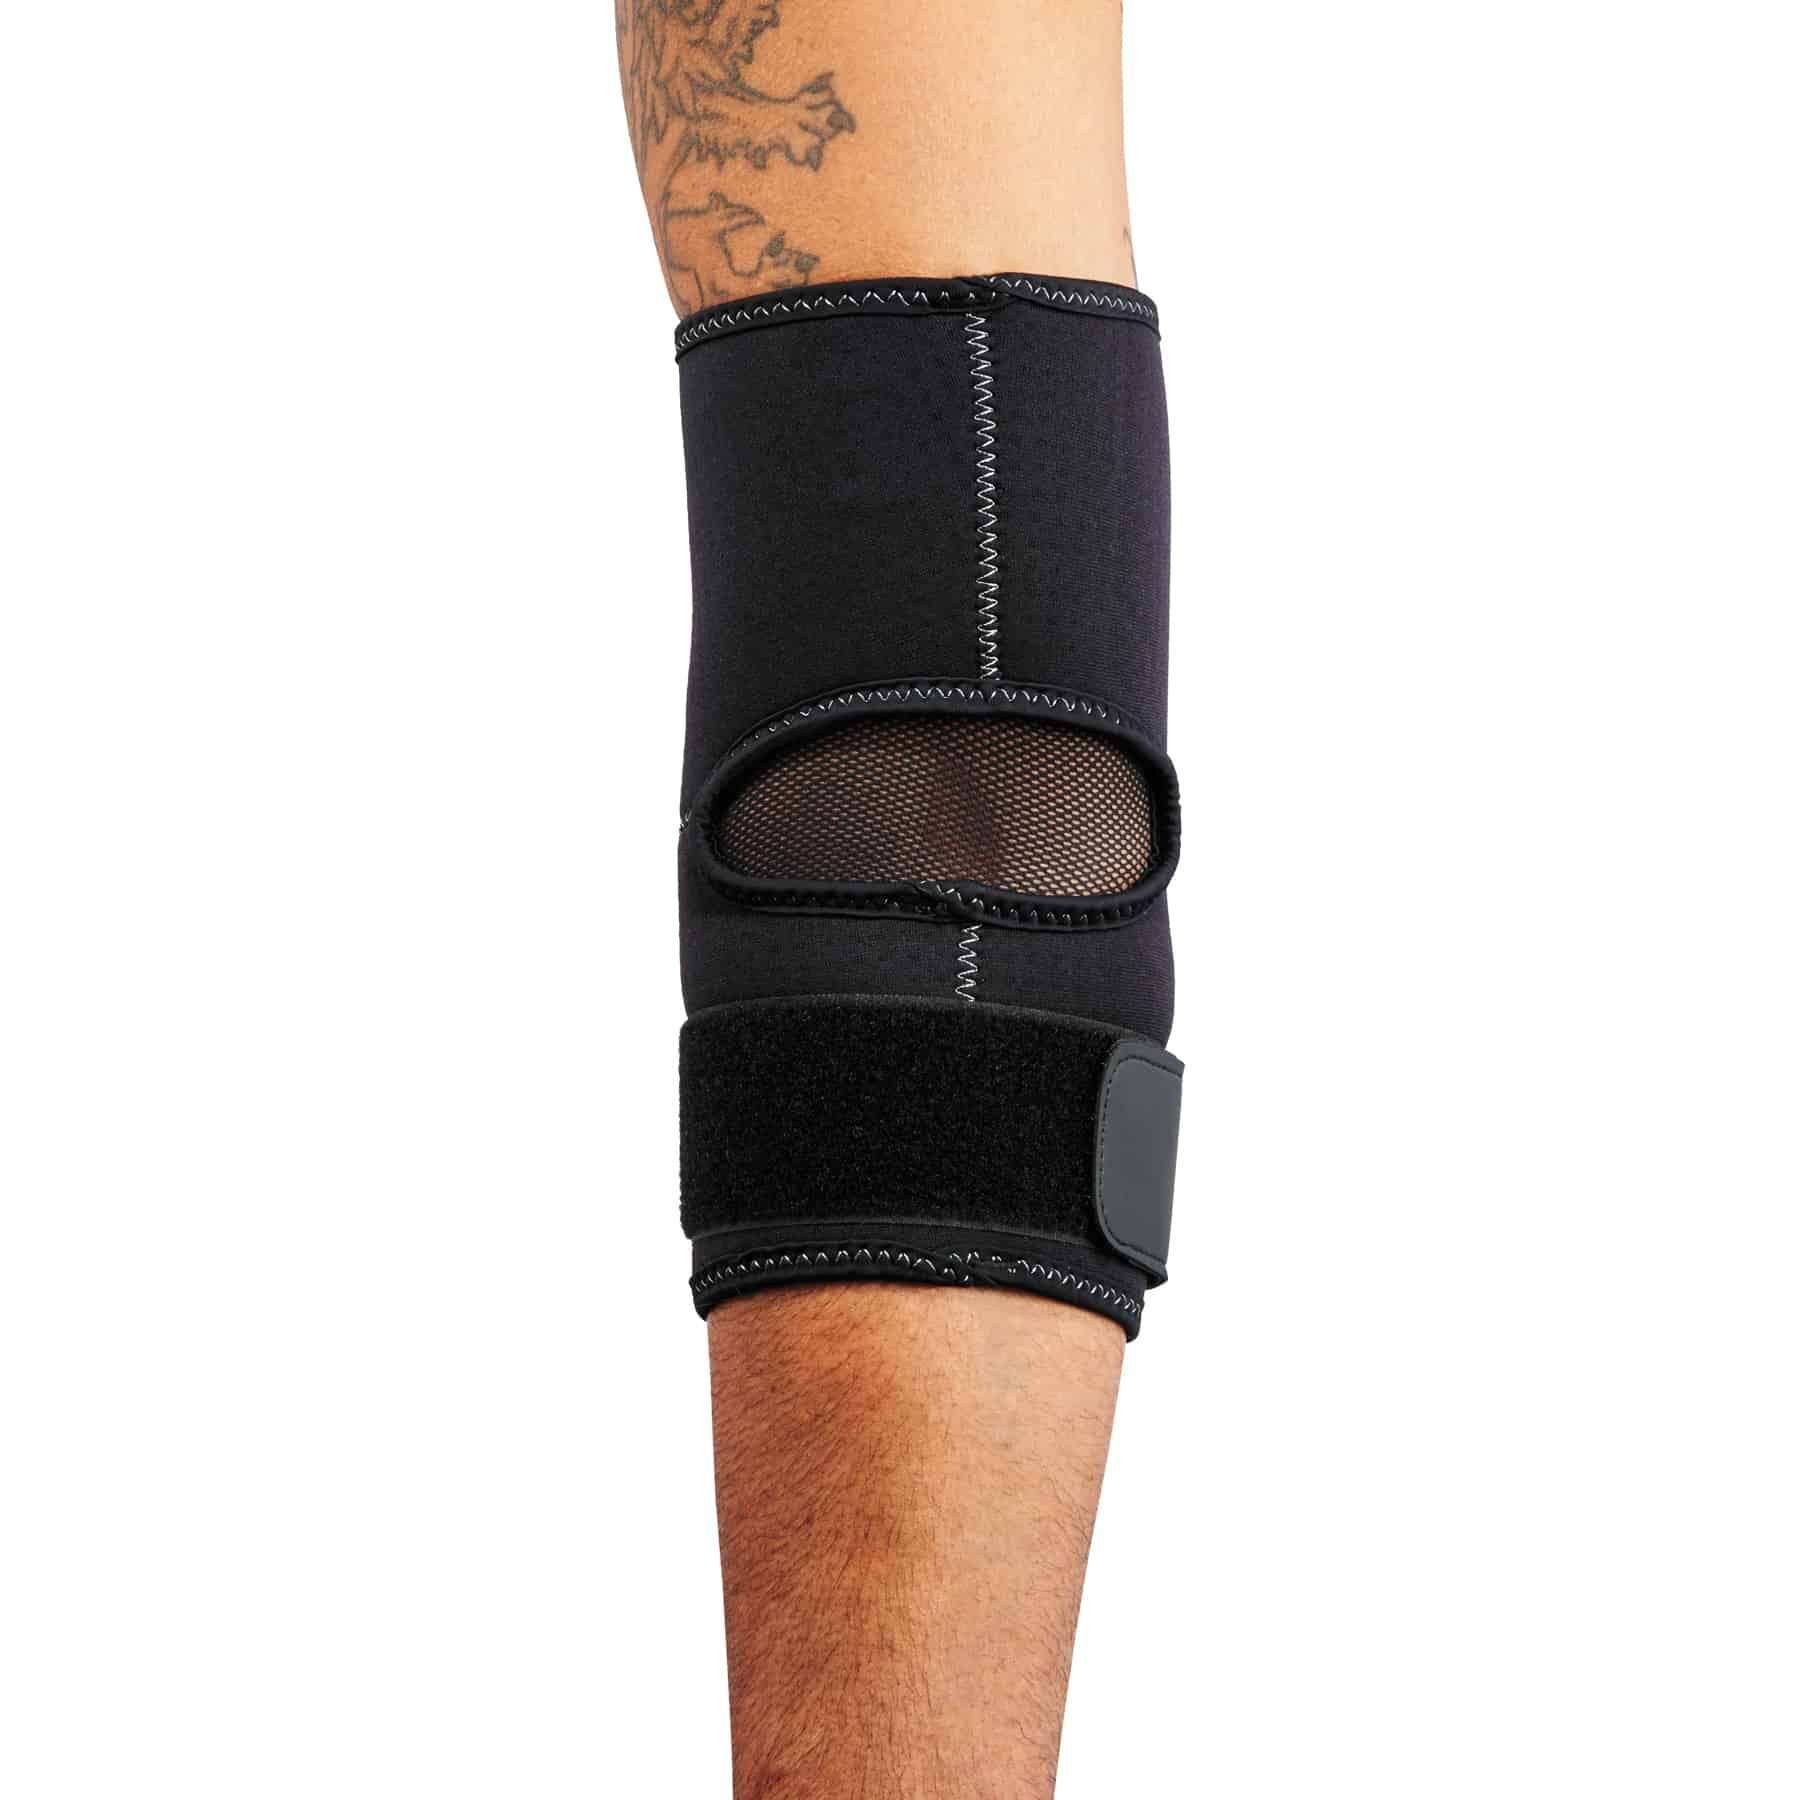 Neoprene Arm Sleeve Supports with Strap